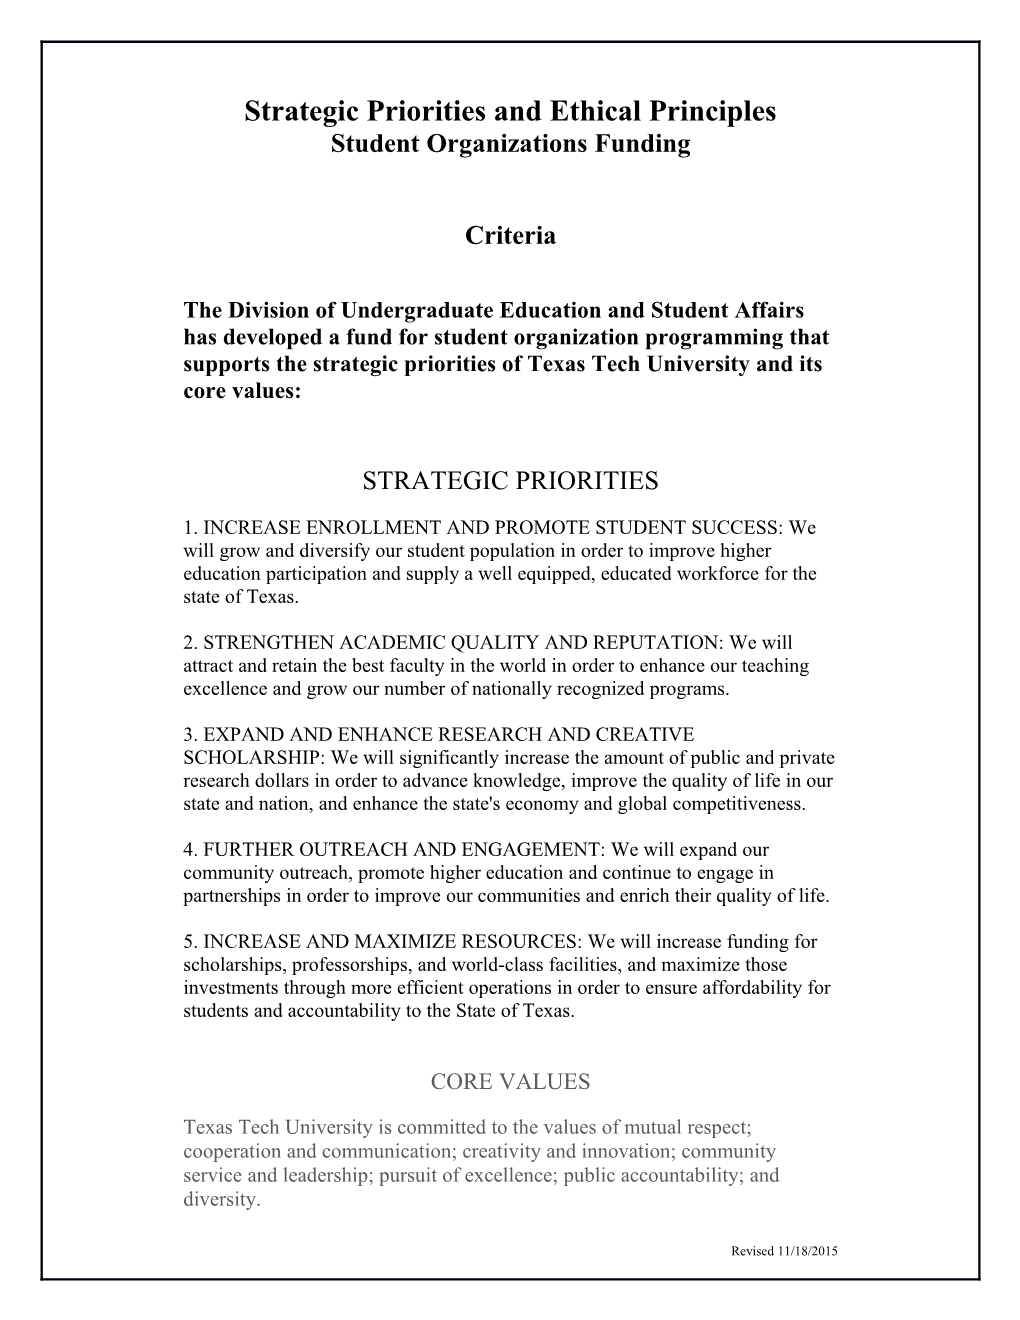 Strategic Priorities and Ethical Principles